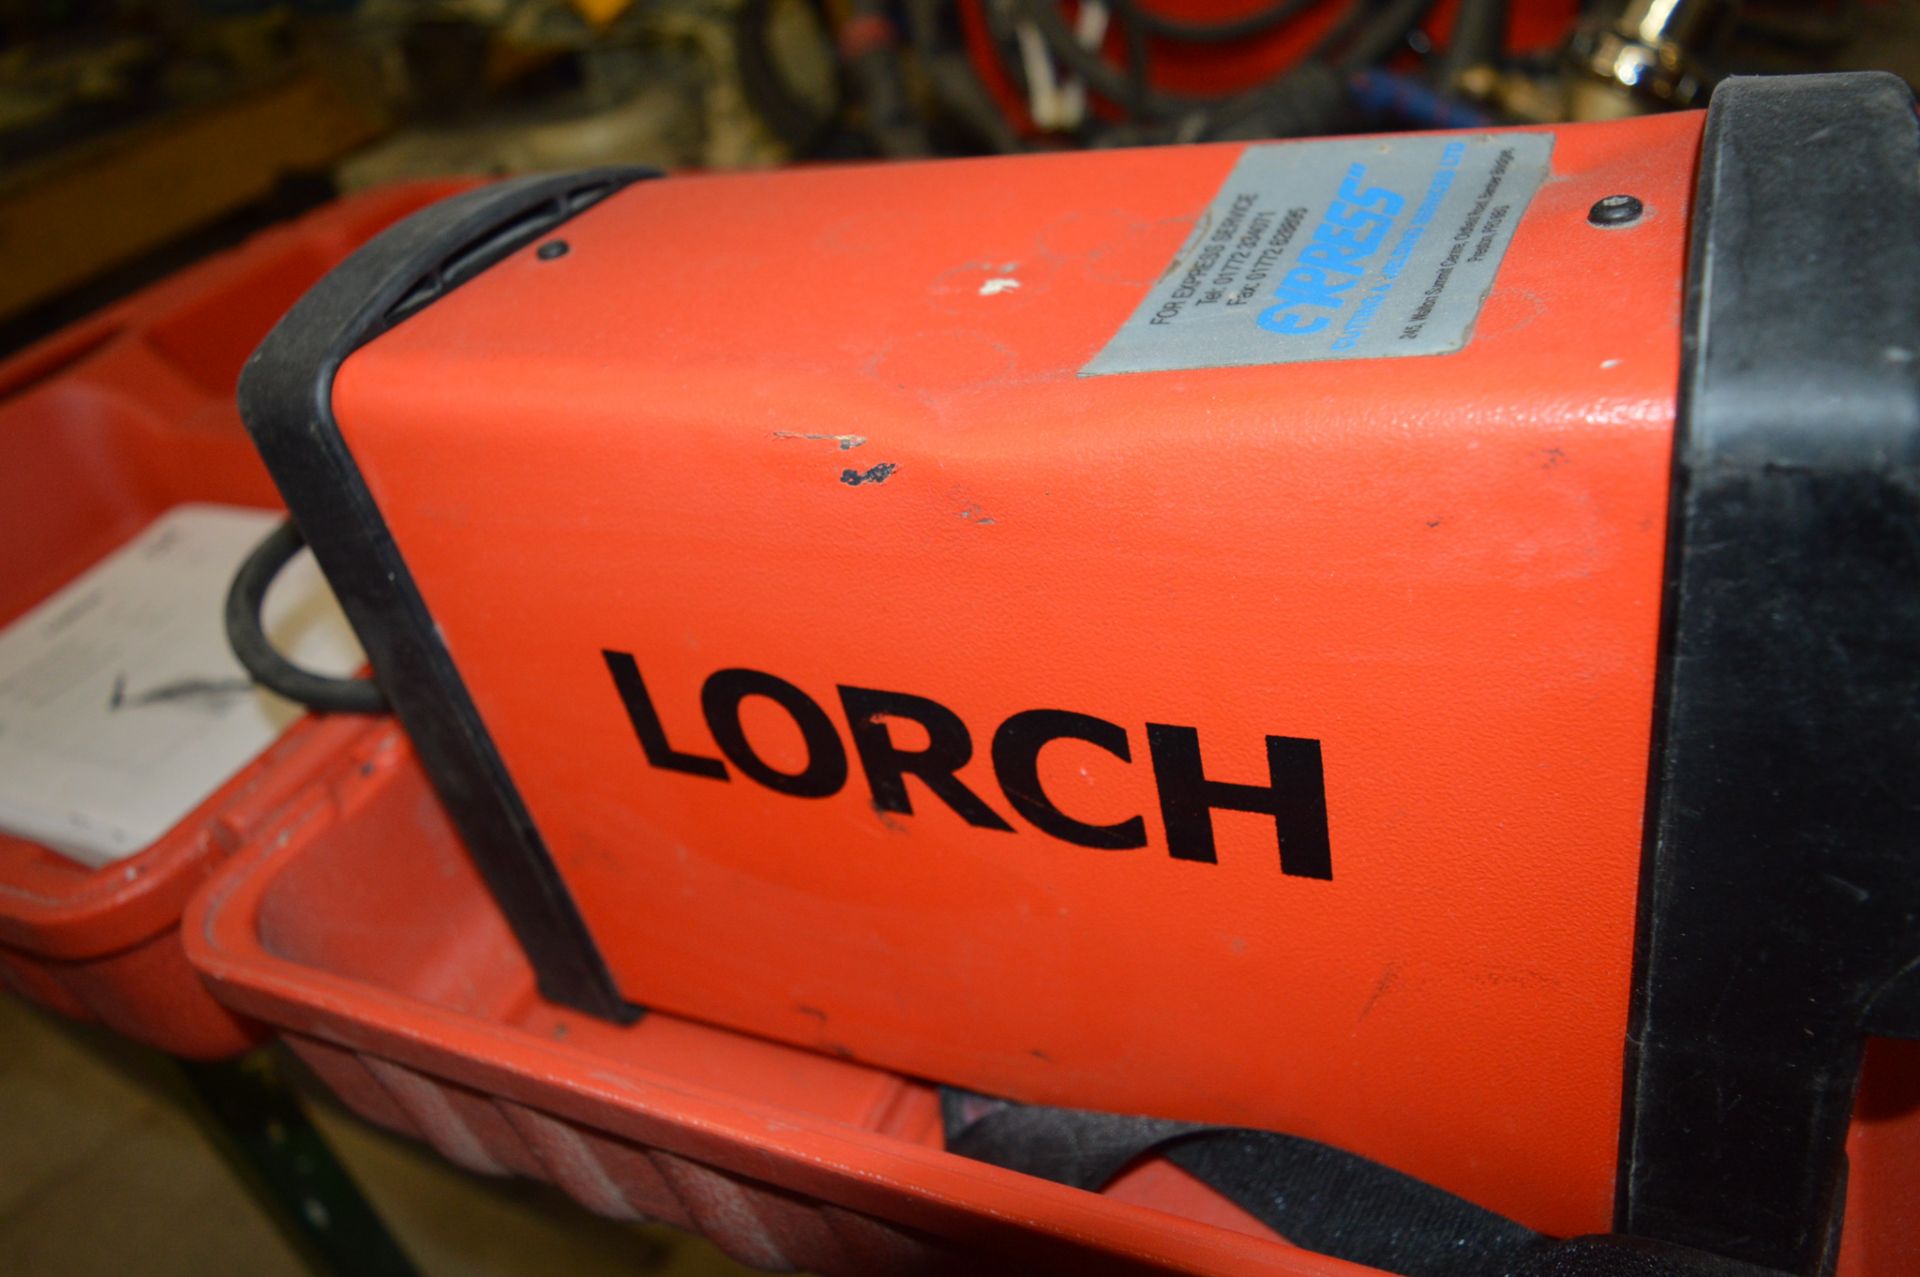 Lorch 240v 180 amp DC TIG welder c/w Lorch welding torch, earth lead, regulator and carry case - Image 2 of 6